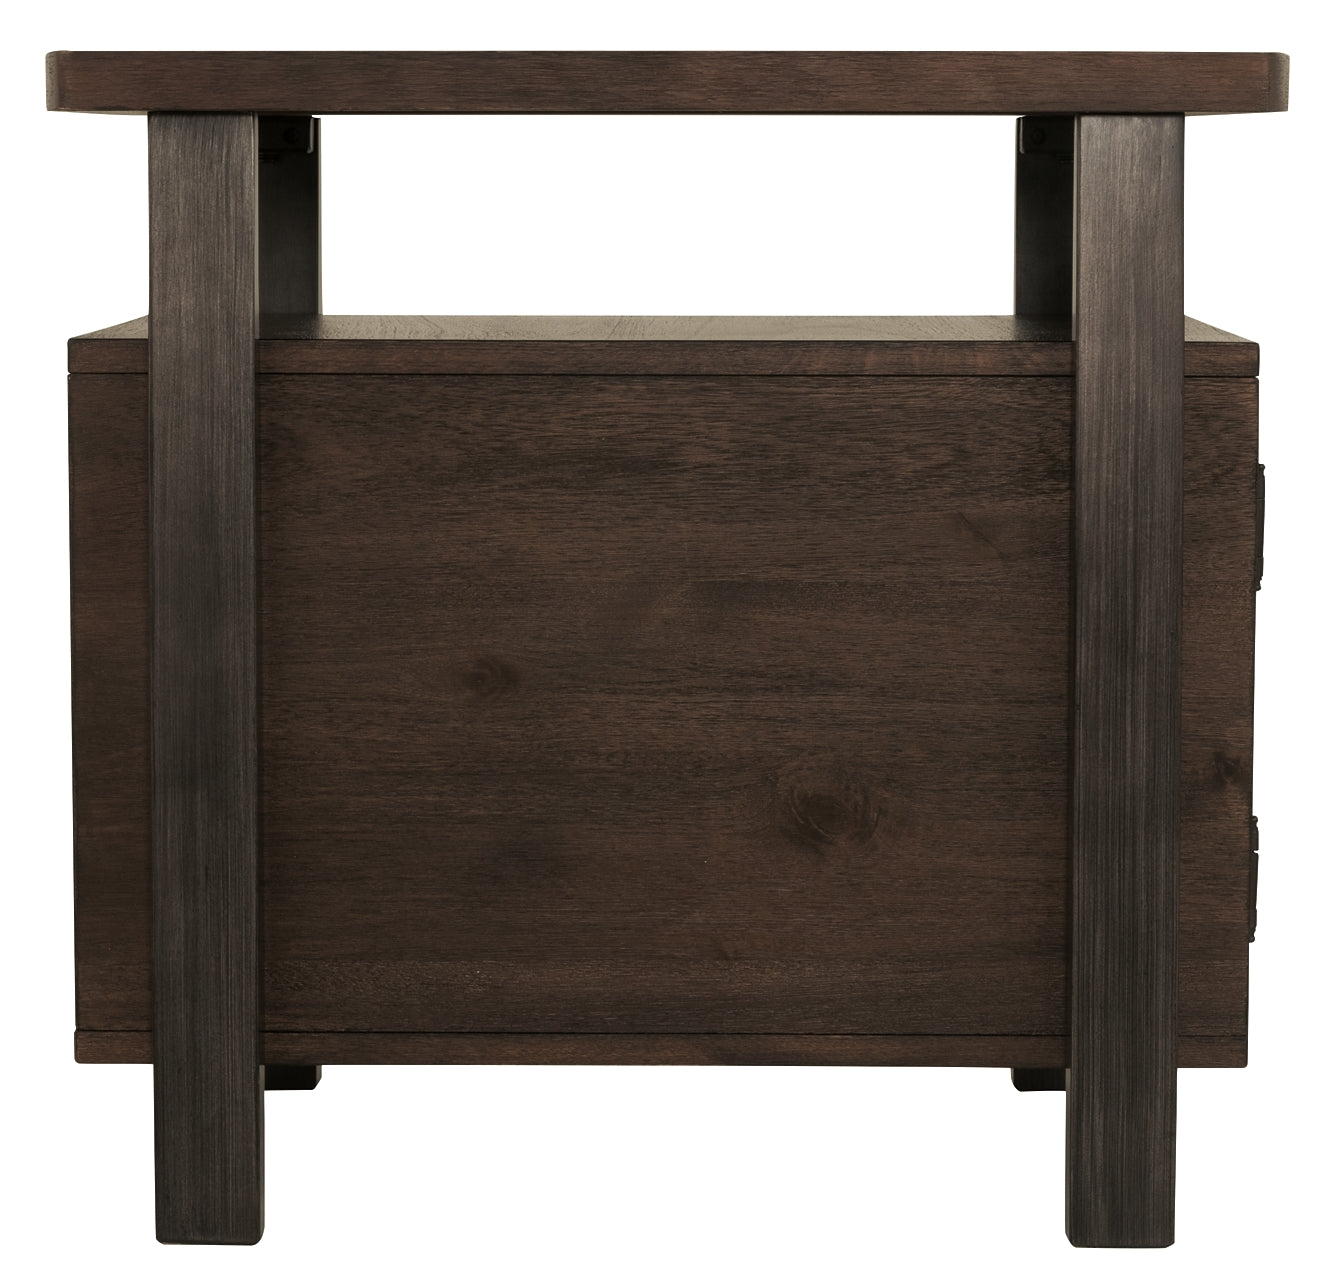 Vailbry Chair Side End Table Smyrna Furniture Outlet